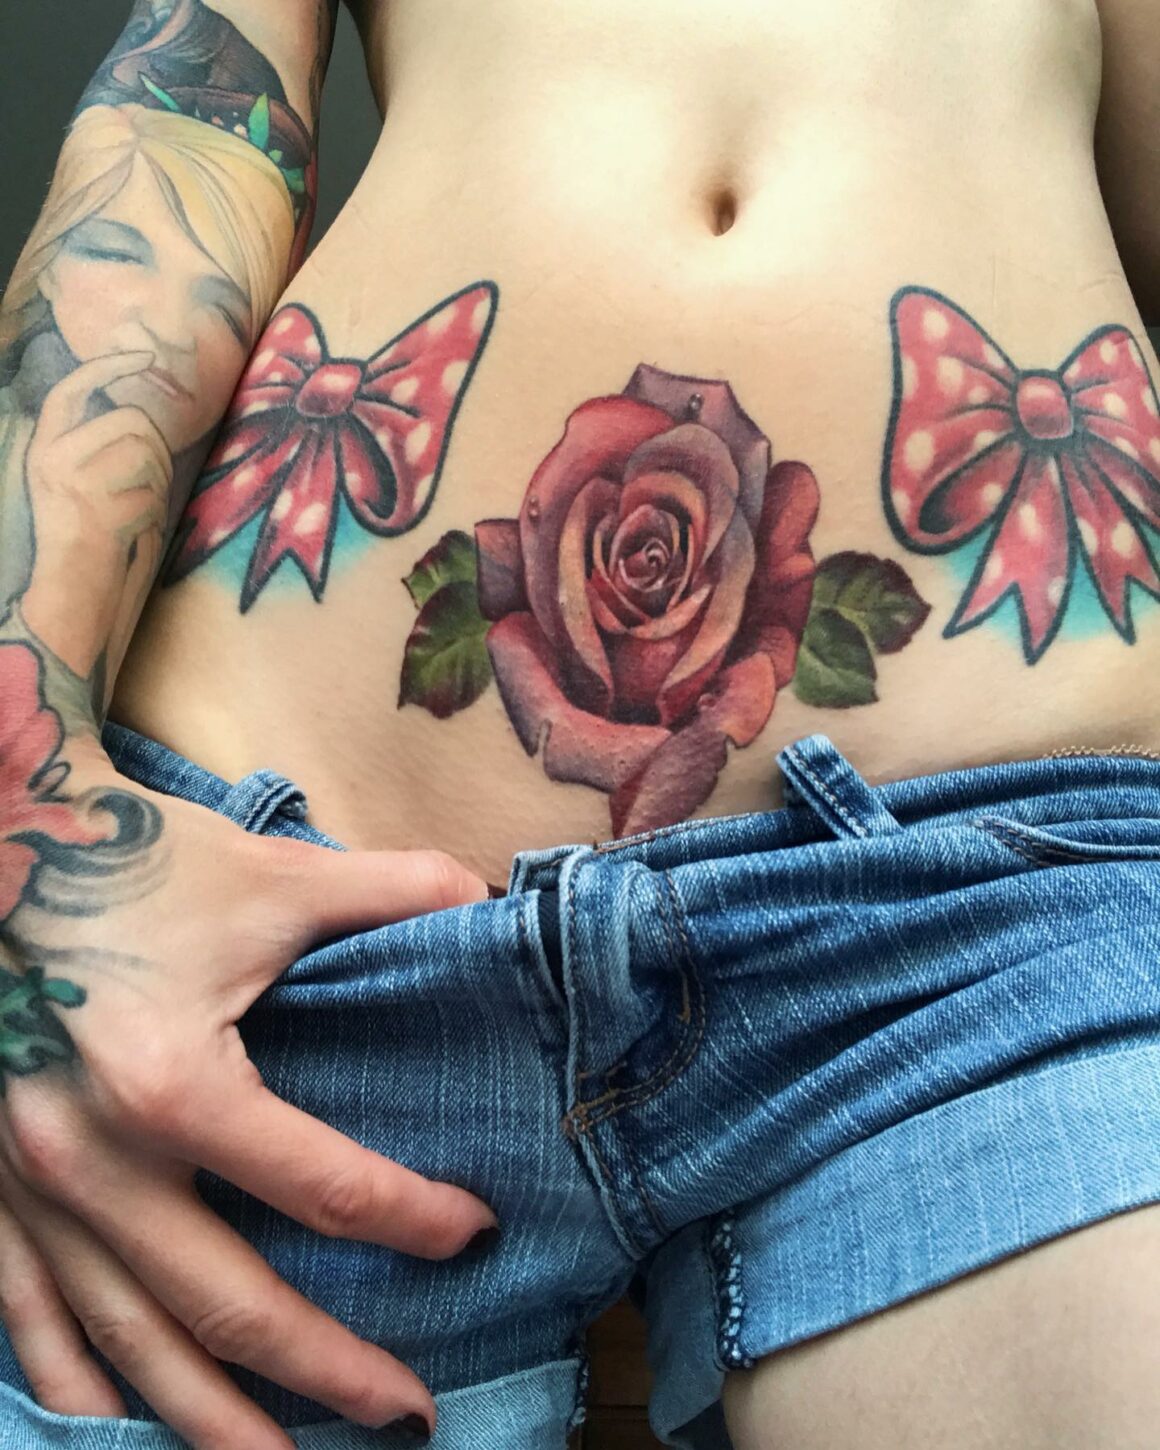 I want to get this on my lower stomach but everyone keeps telling it will  be to painful in that area for my first time what do yall think is the  pain